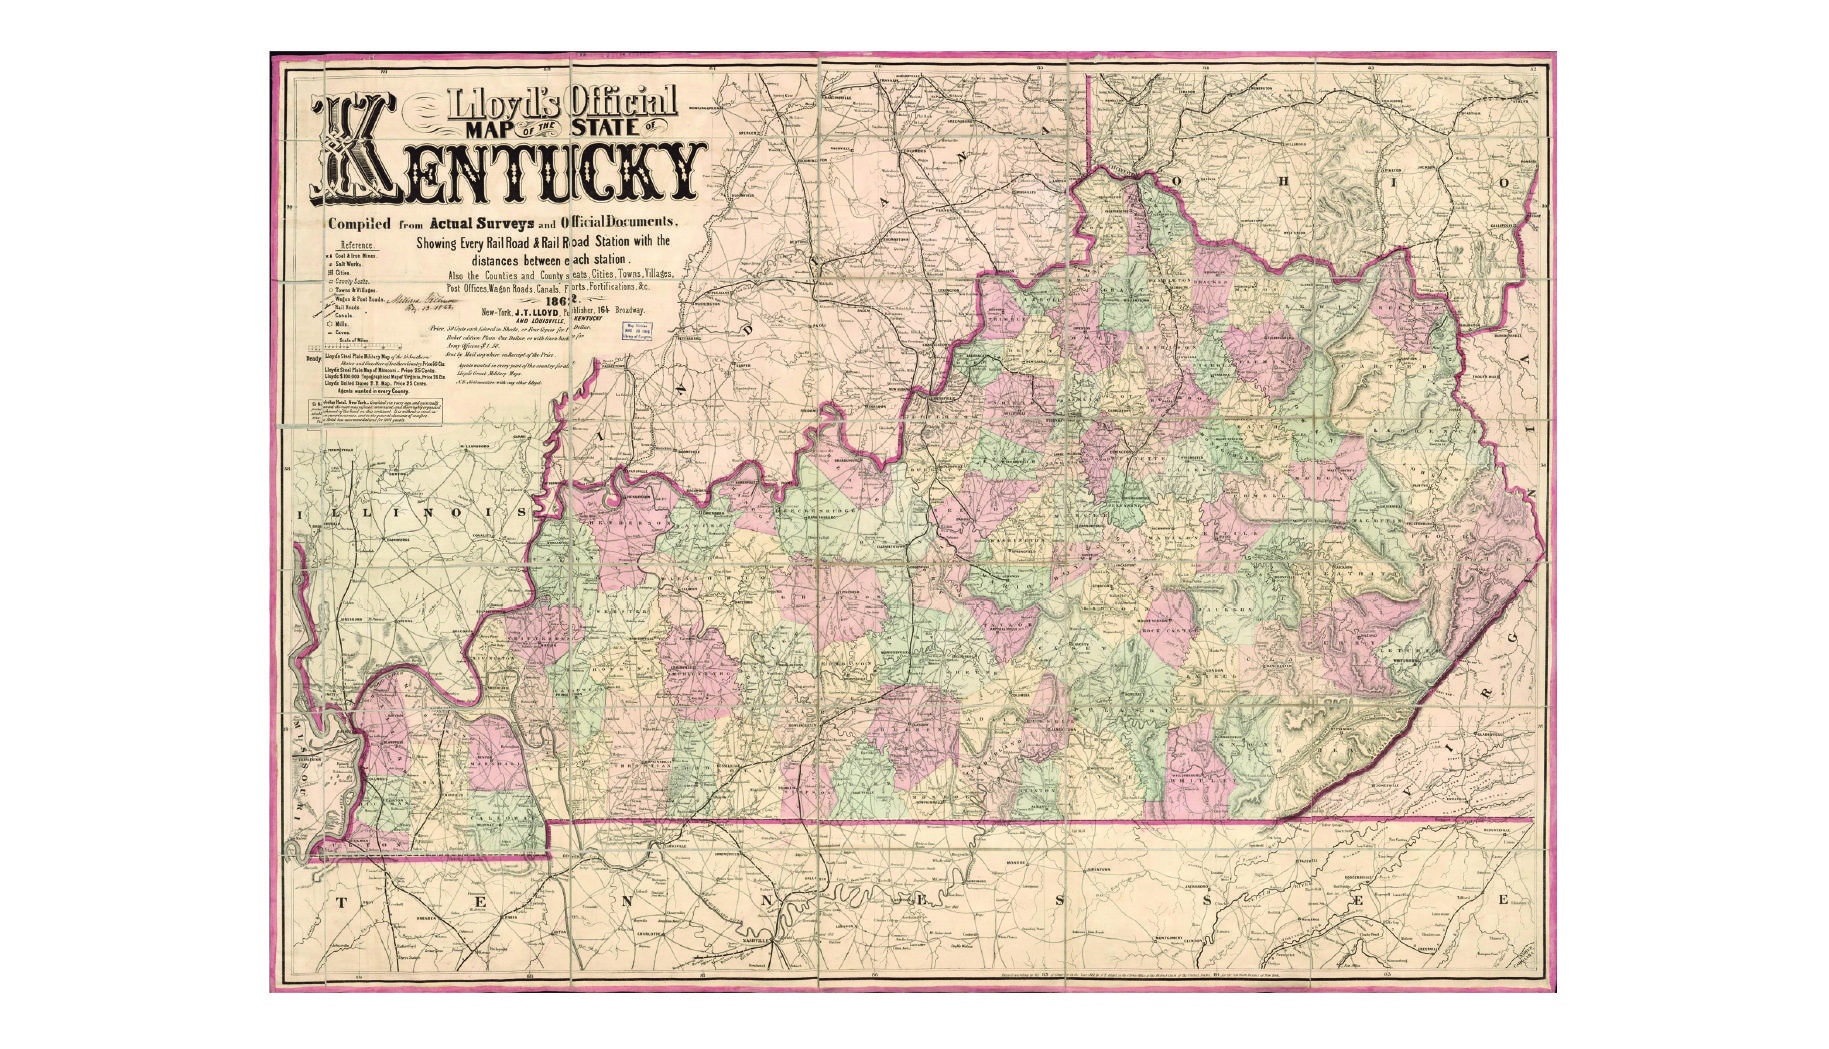 This map of Kentucky was published in 1863 by James T. Lloyd and is in the map collection of the Library of Congress.